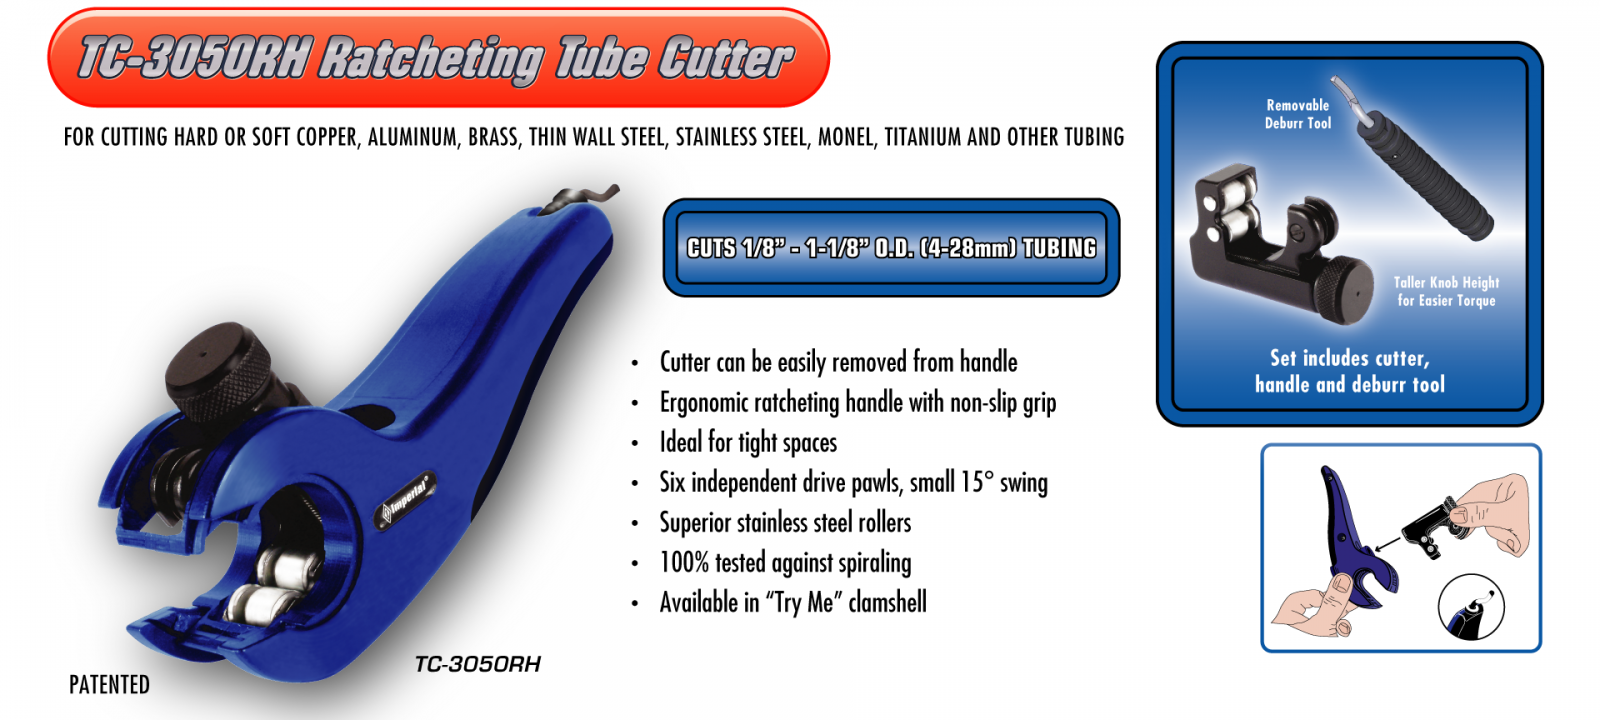 Imperial Ratcheting Tube Cutter For 1/8" To 1-1/8" [ 4mm To 28mm ] O.d. Tube - Tc-3050rh hvac shop